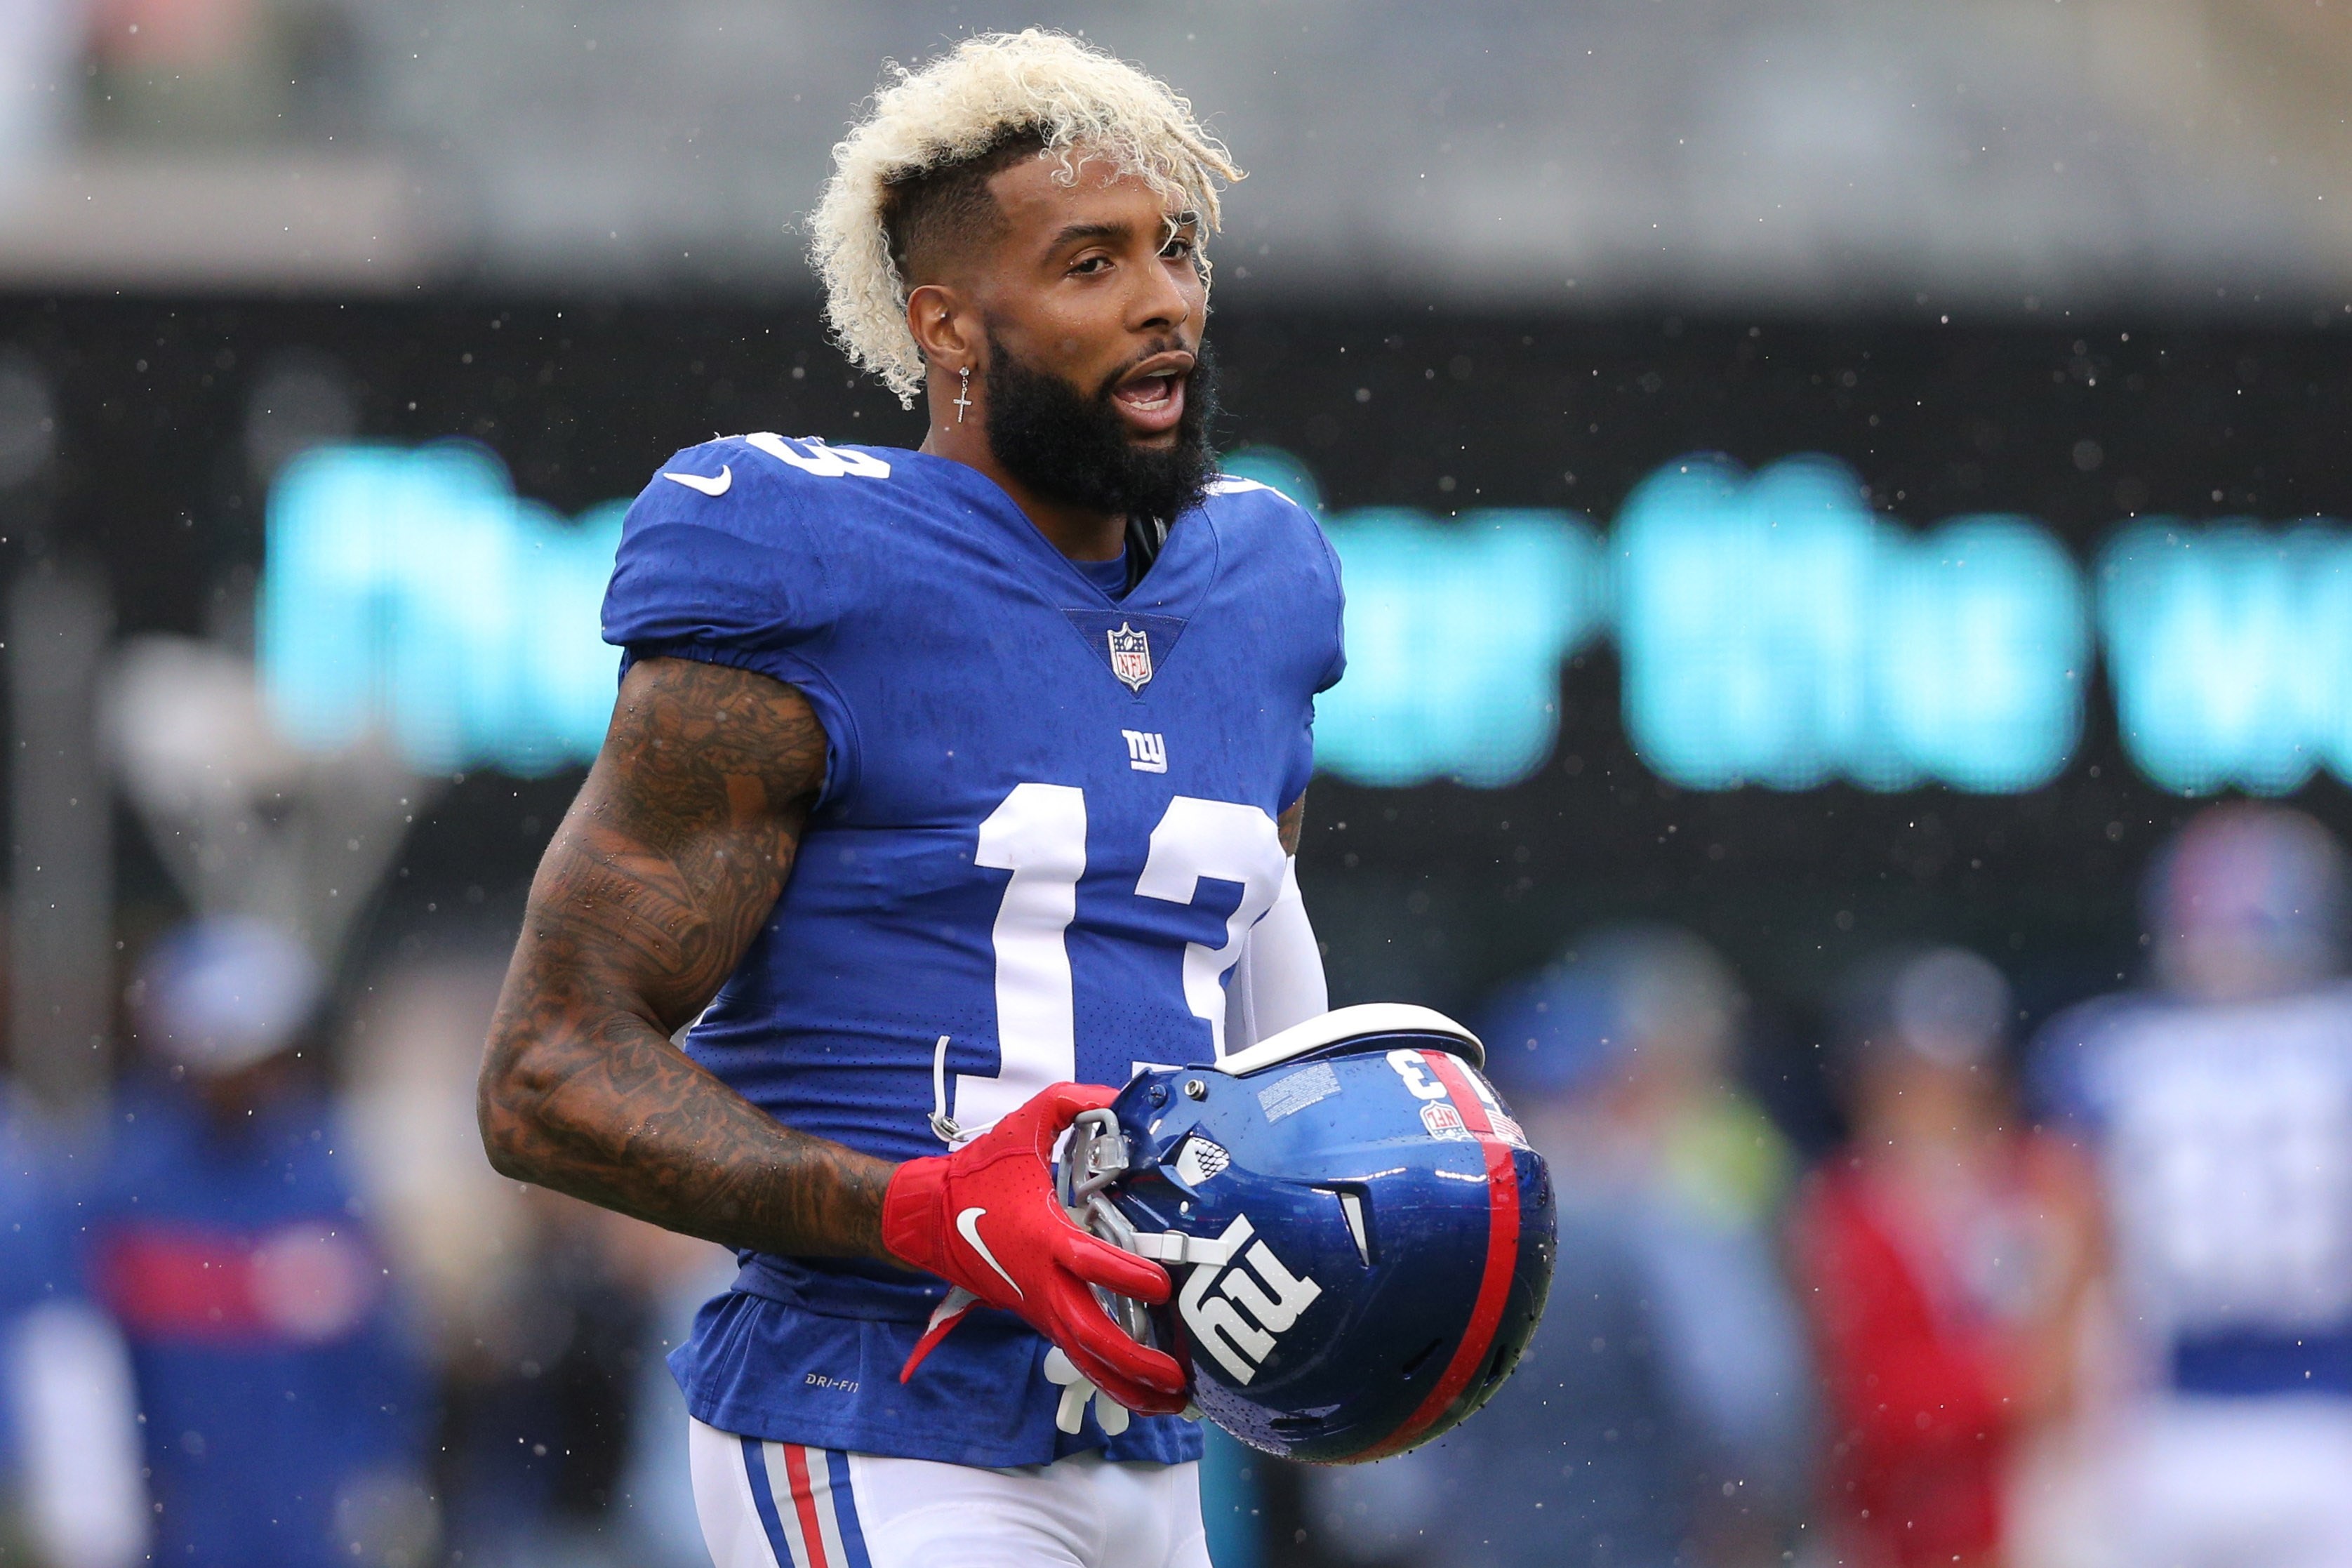 New York Giants Odell Beckham Jr. “Not Afraid” Of Coming Back To NY